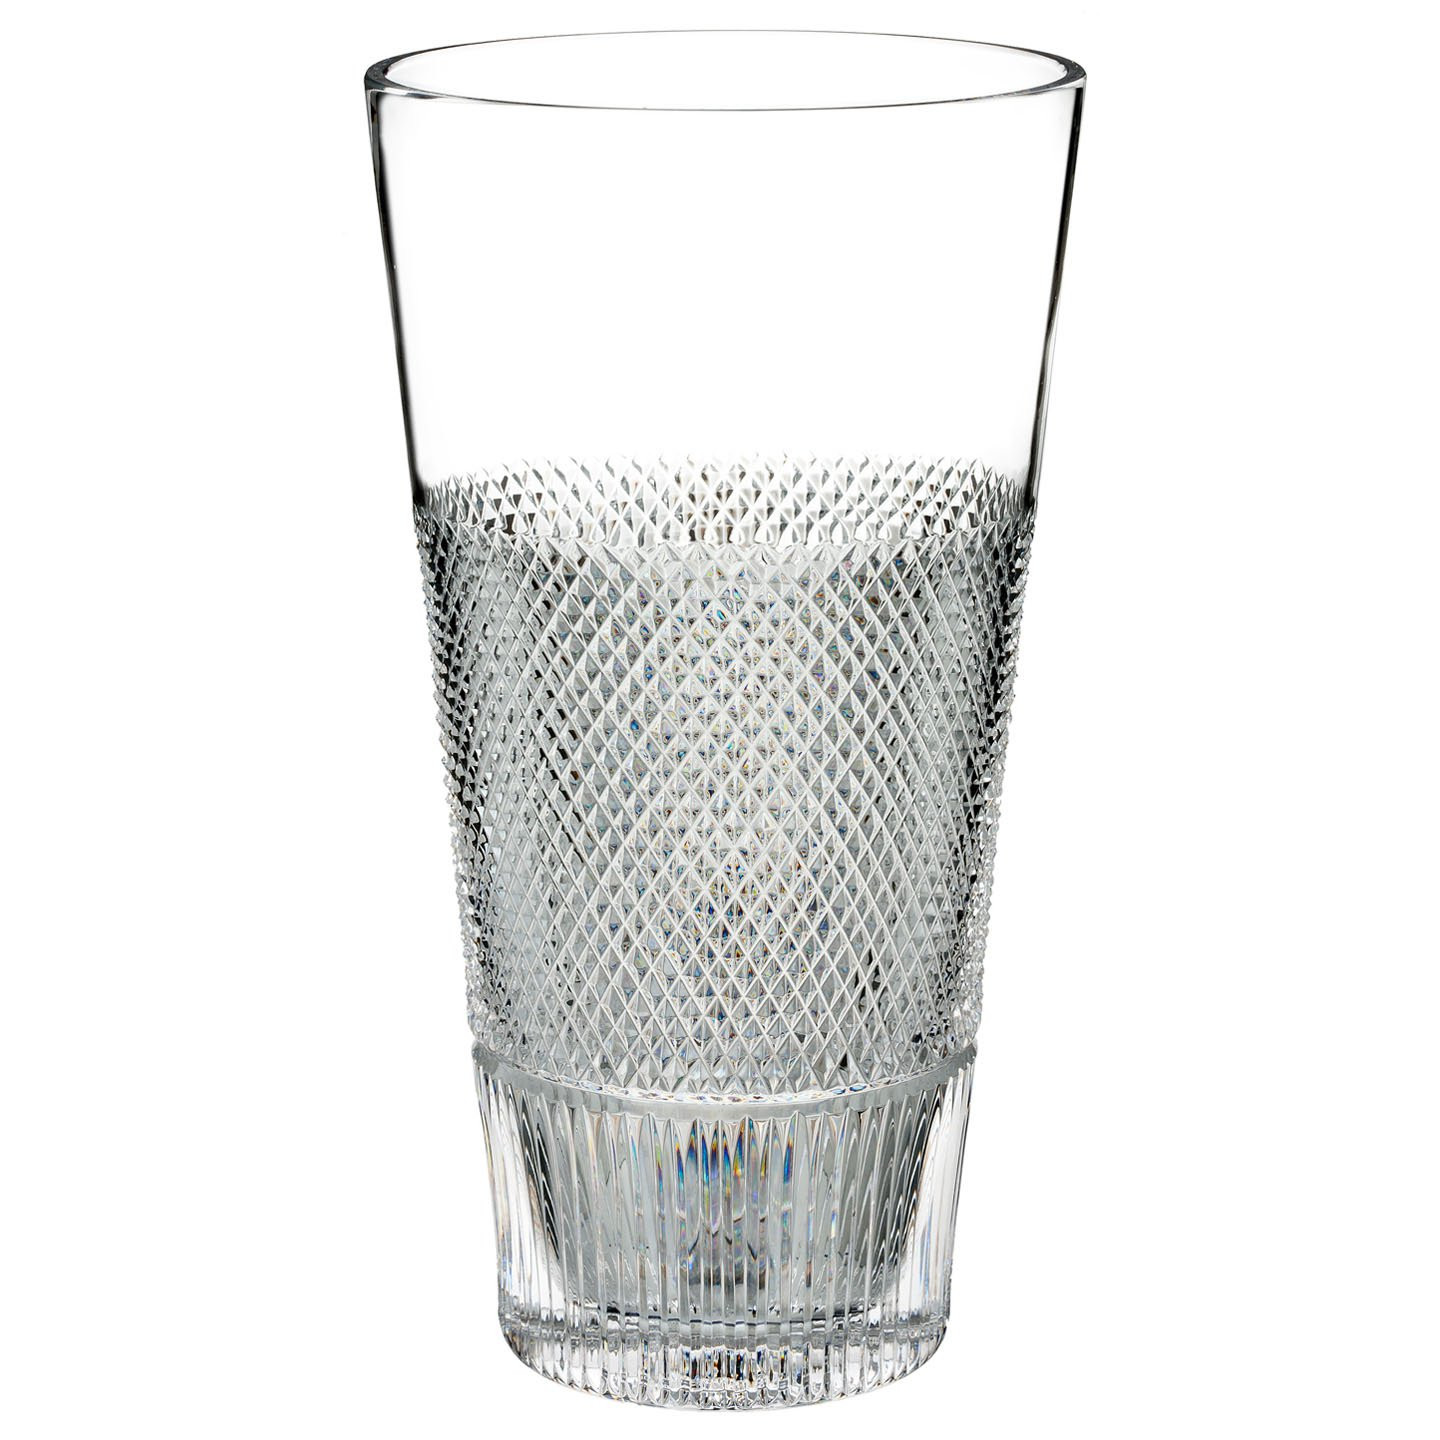 25 attractive Marquis by Waterford Shelton Vase 12 2024 free download marquis by waterford shelton vase 12 of diamond line flute set of 2 waterforda crystal inside https www waterford co uk diamond line flute set of 2